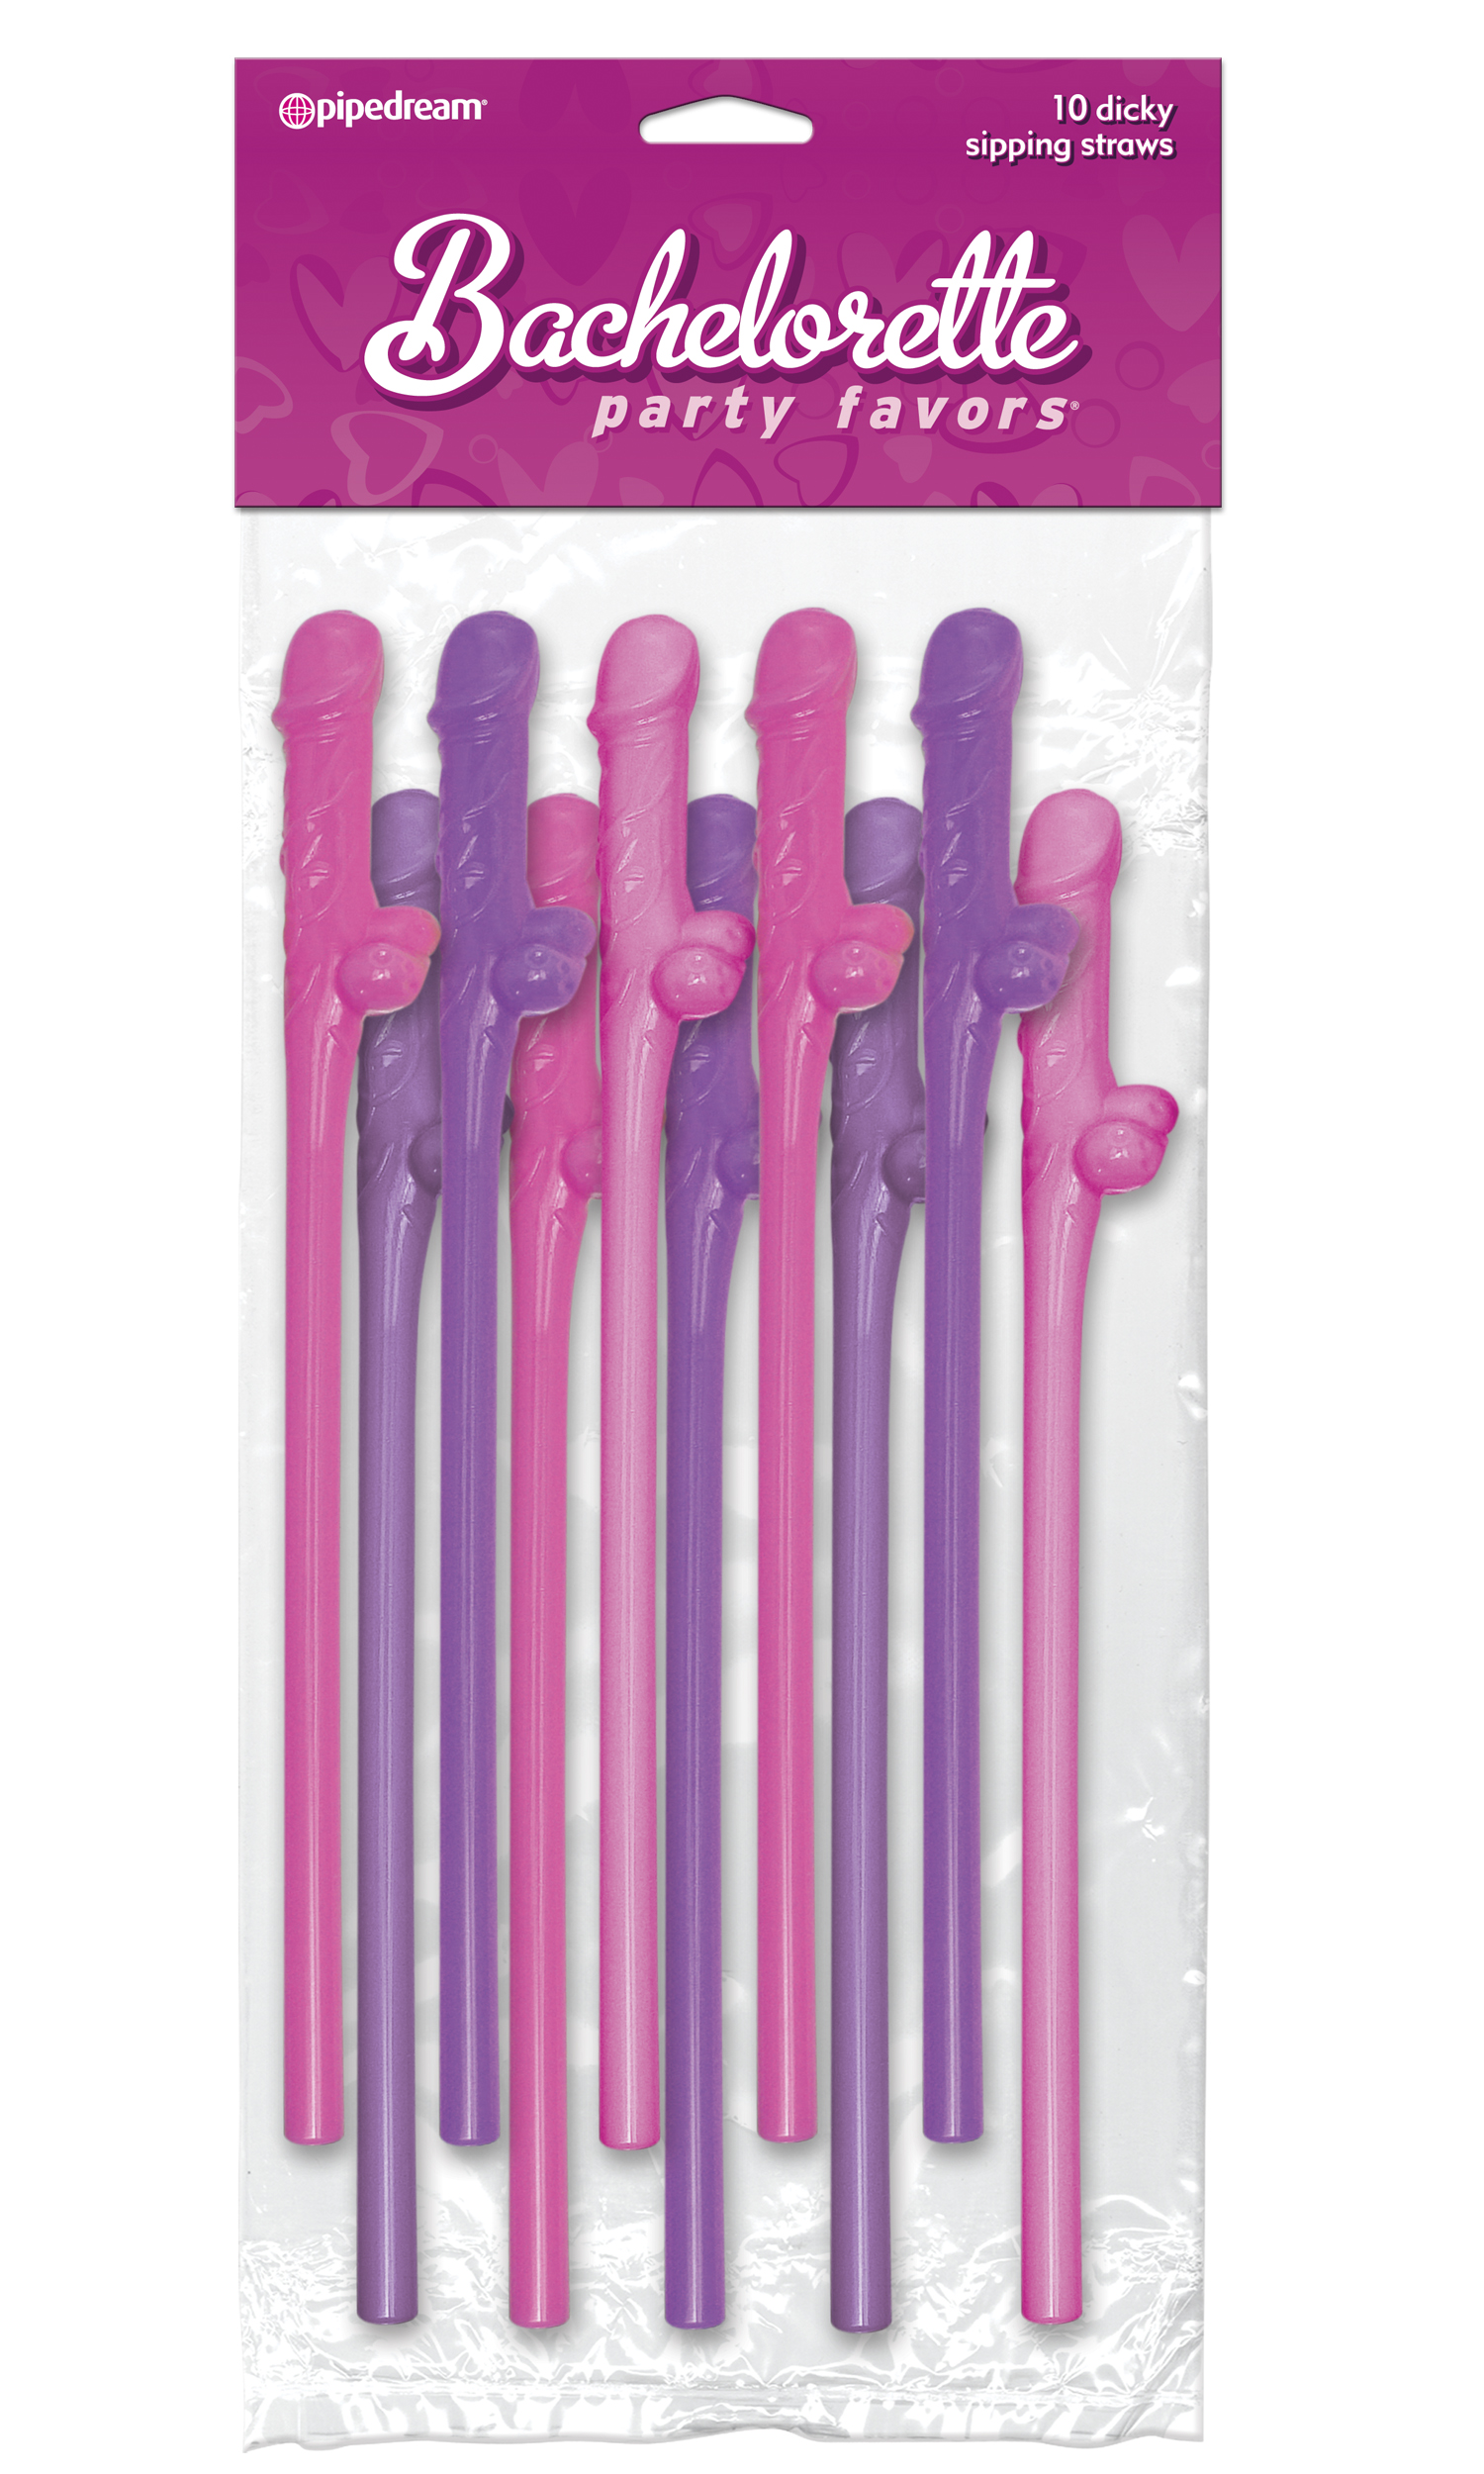 bachelorette party favors  dicky sipping straws pink purple 